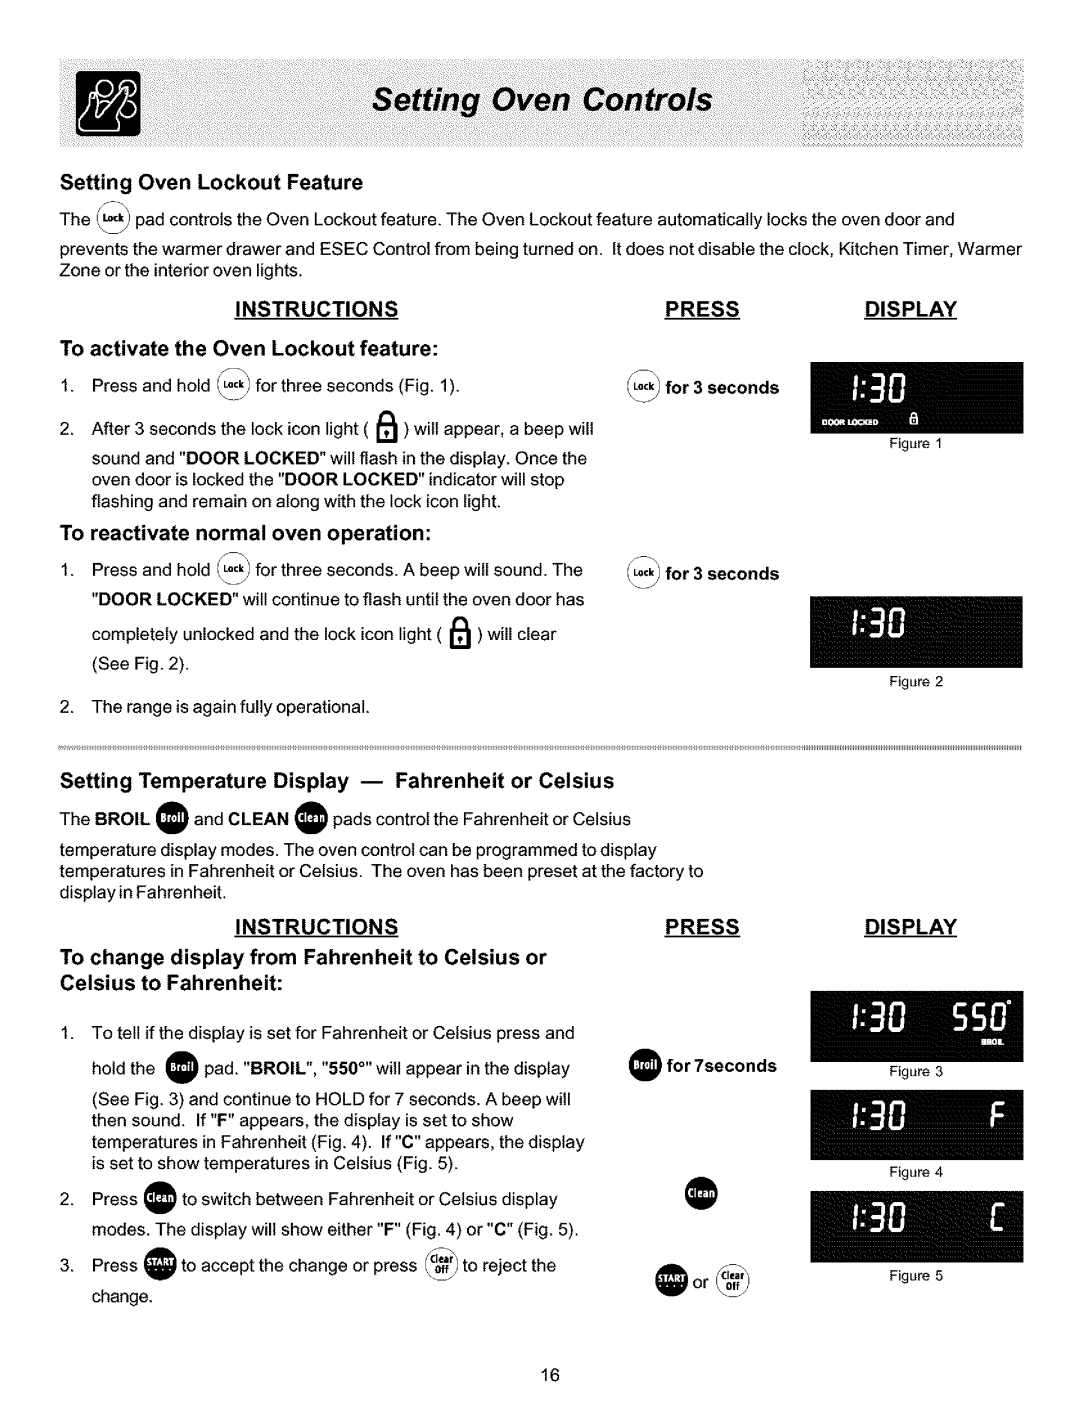 Frigidaire ES400 @or@, Setting Oven Lockout Feature, Instructions, Press, Display, To activate the Oven Lockout feature 